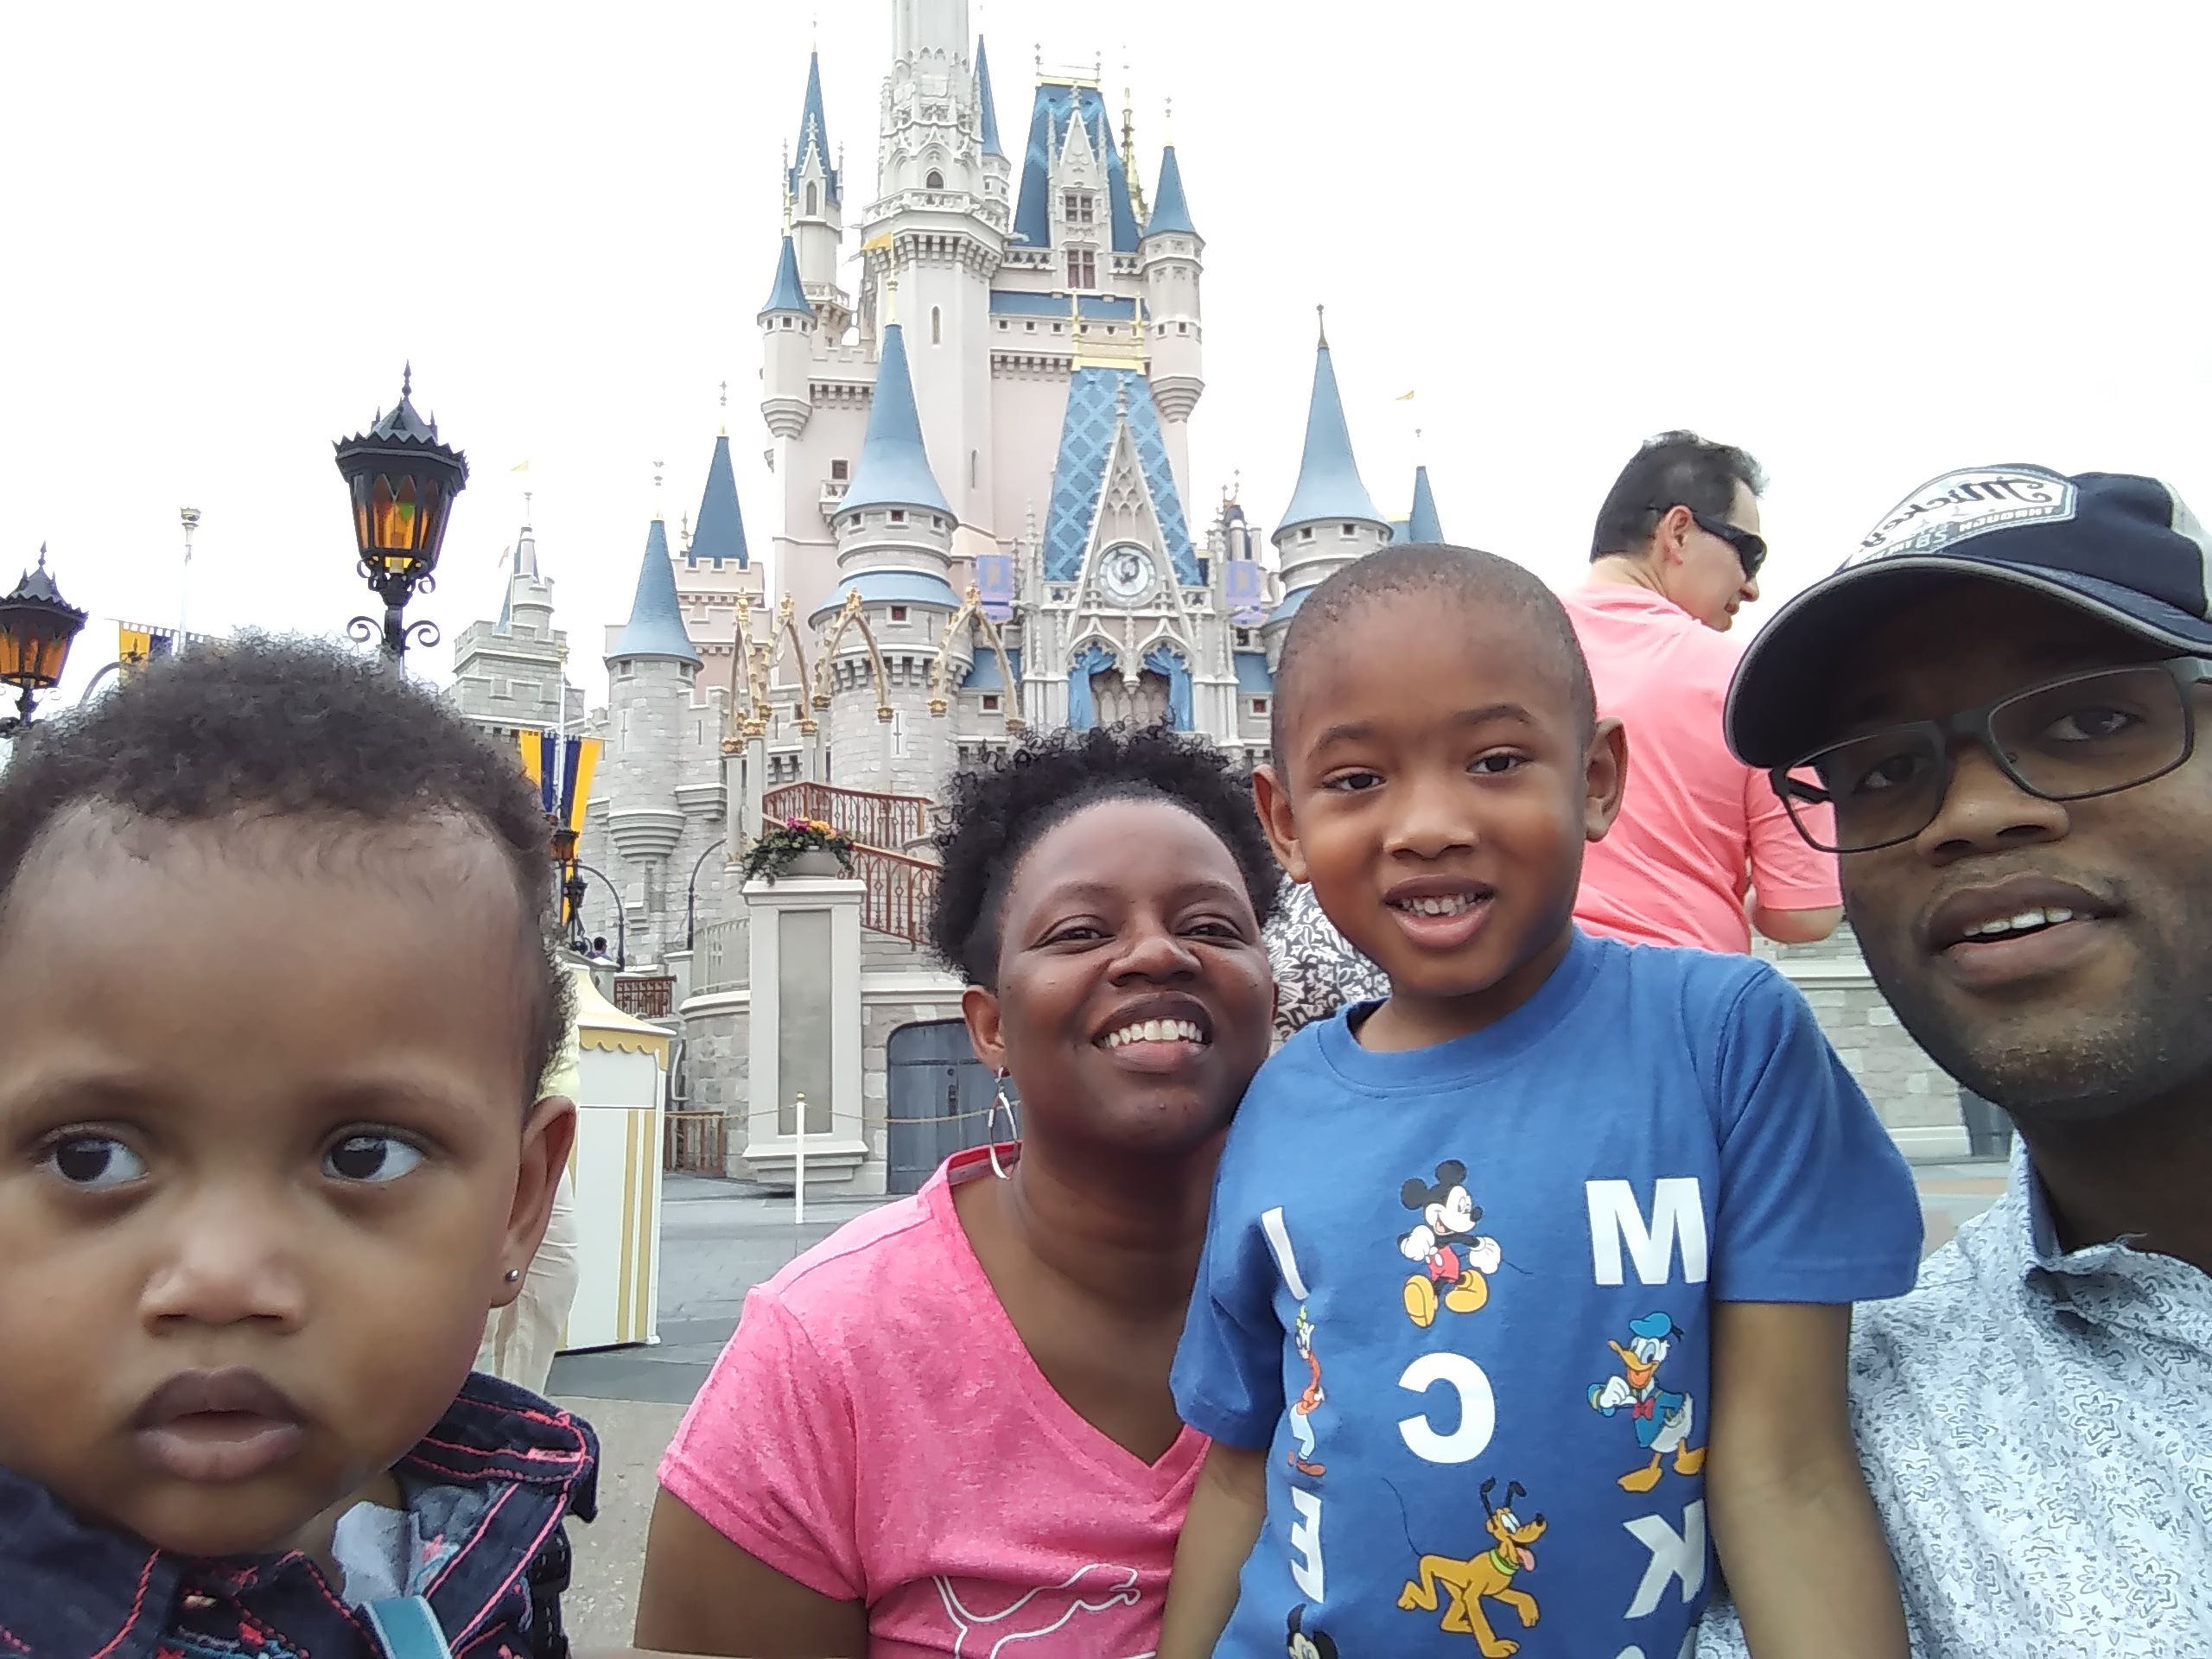 Our Ride-Free Disney World Experience